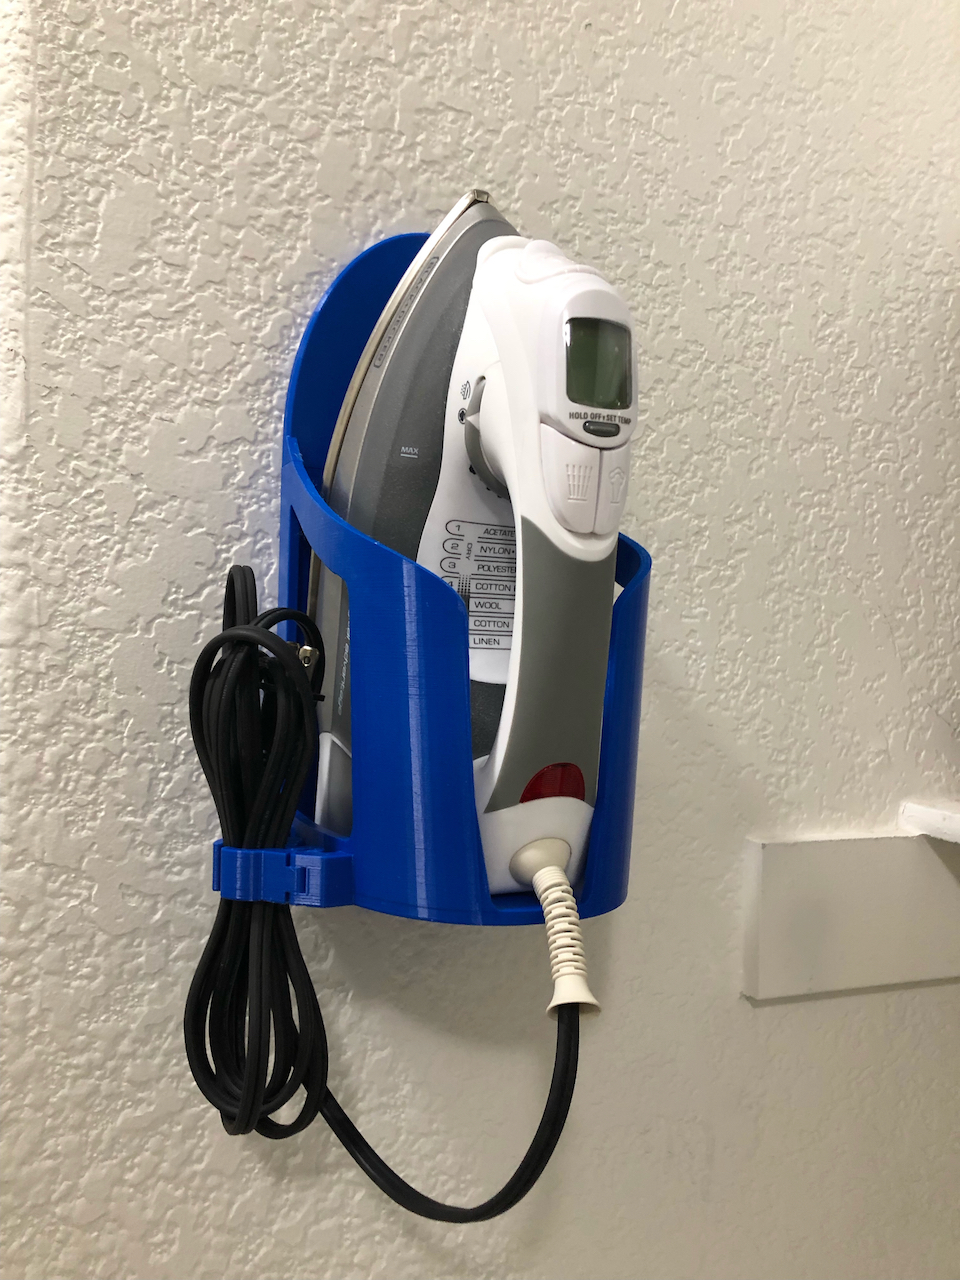 Wall-mounted Iron Holder with cable clip